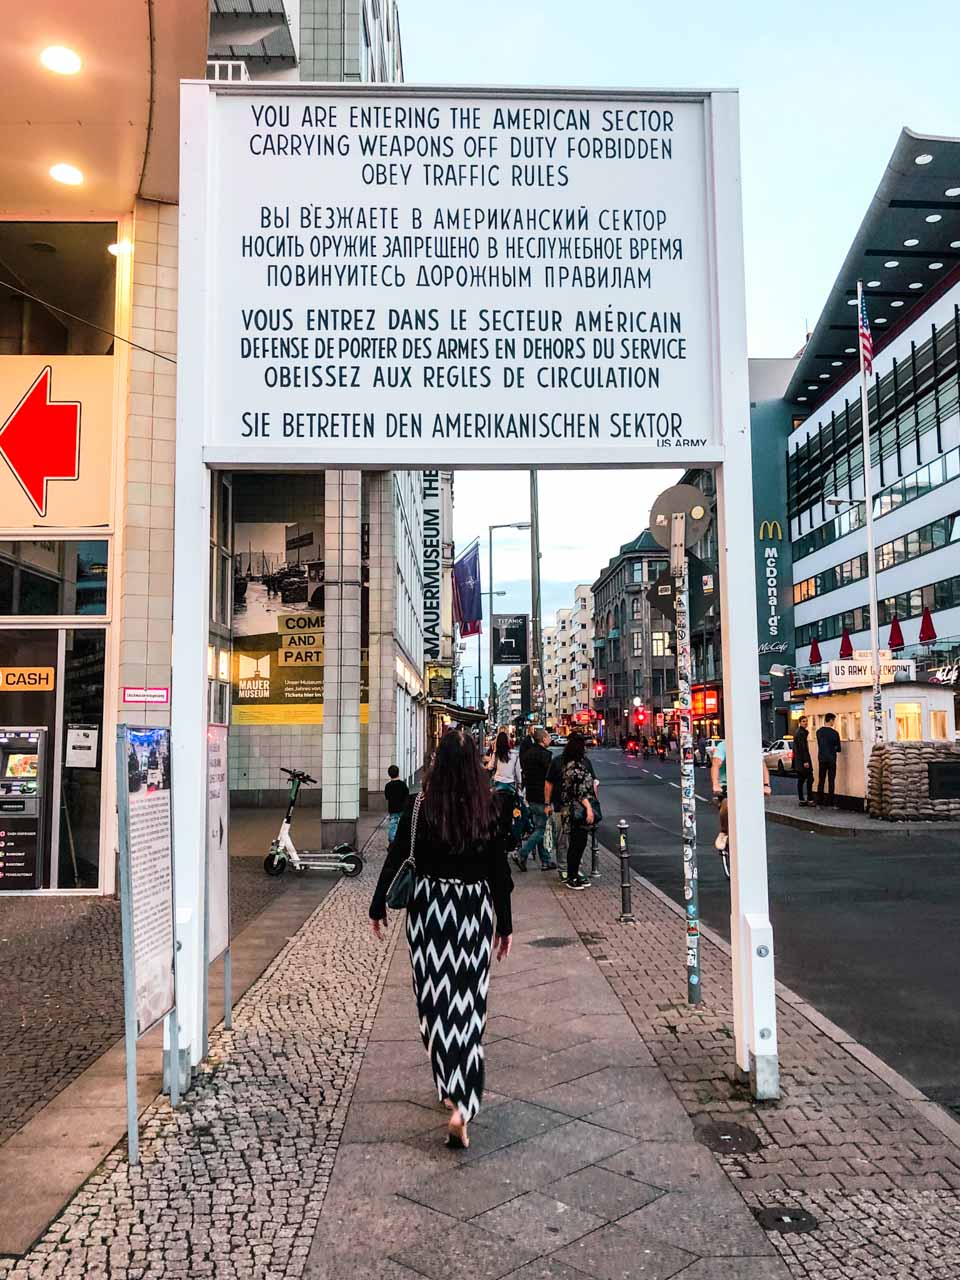 Girl walking under the sign at Checkpoint Charlie that says "You are entering the American sector"